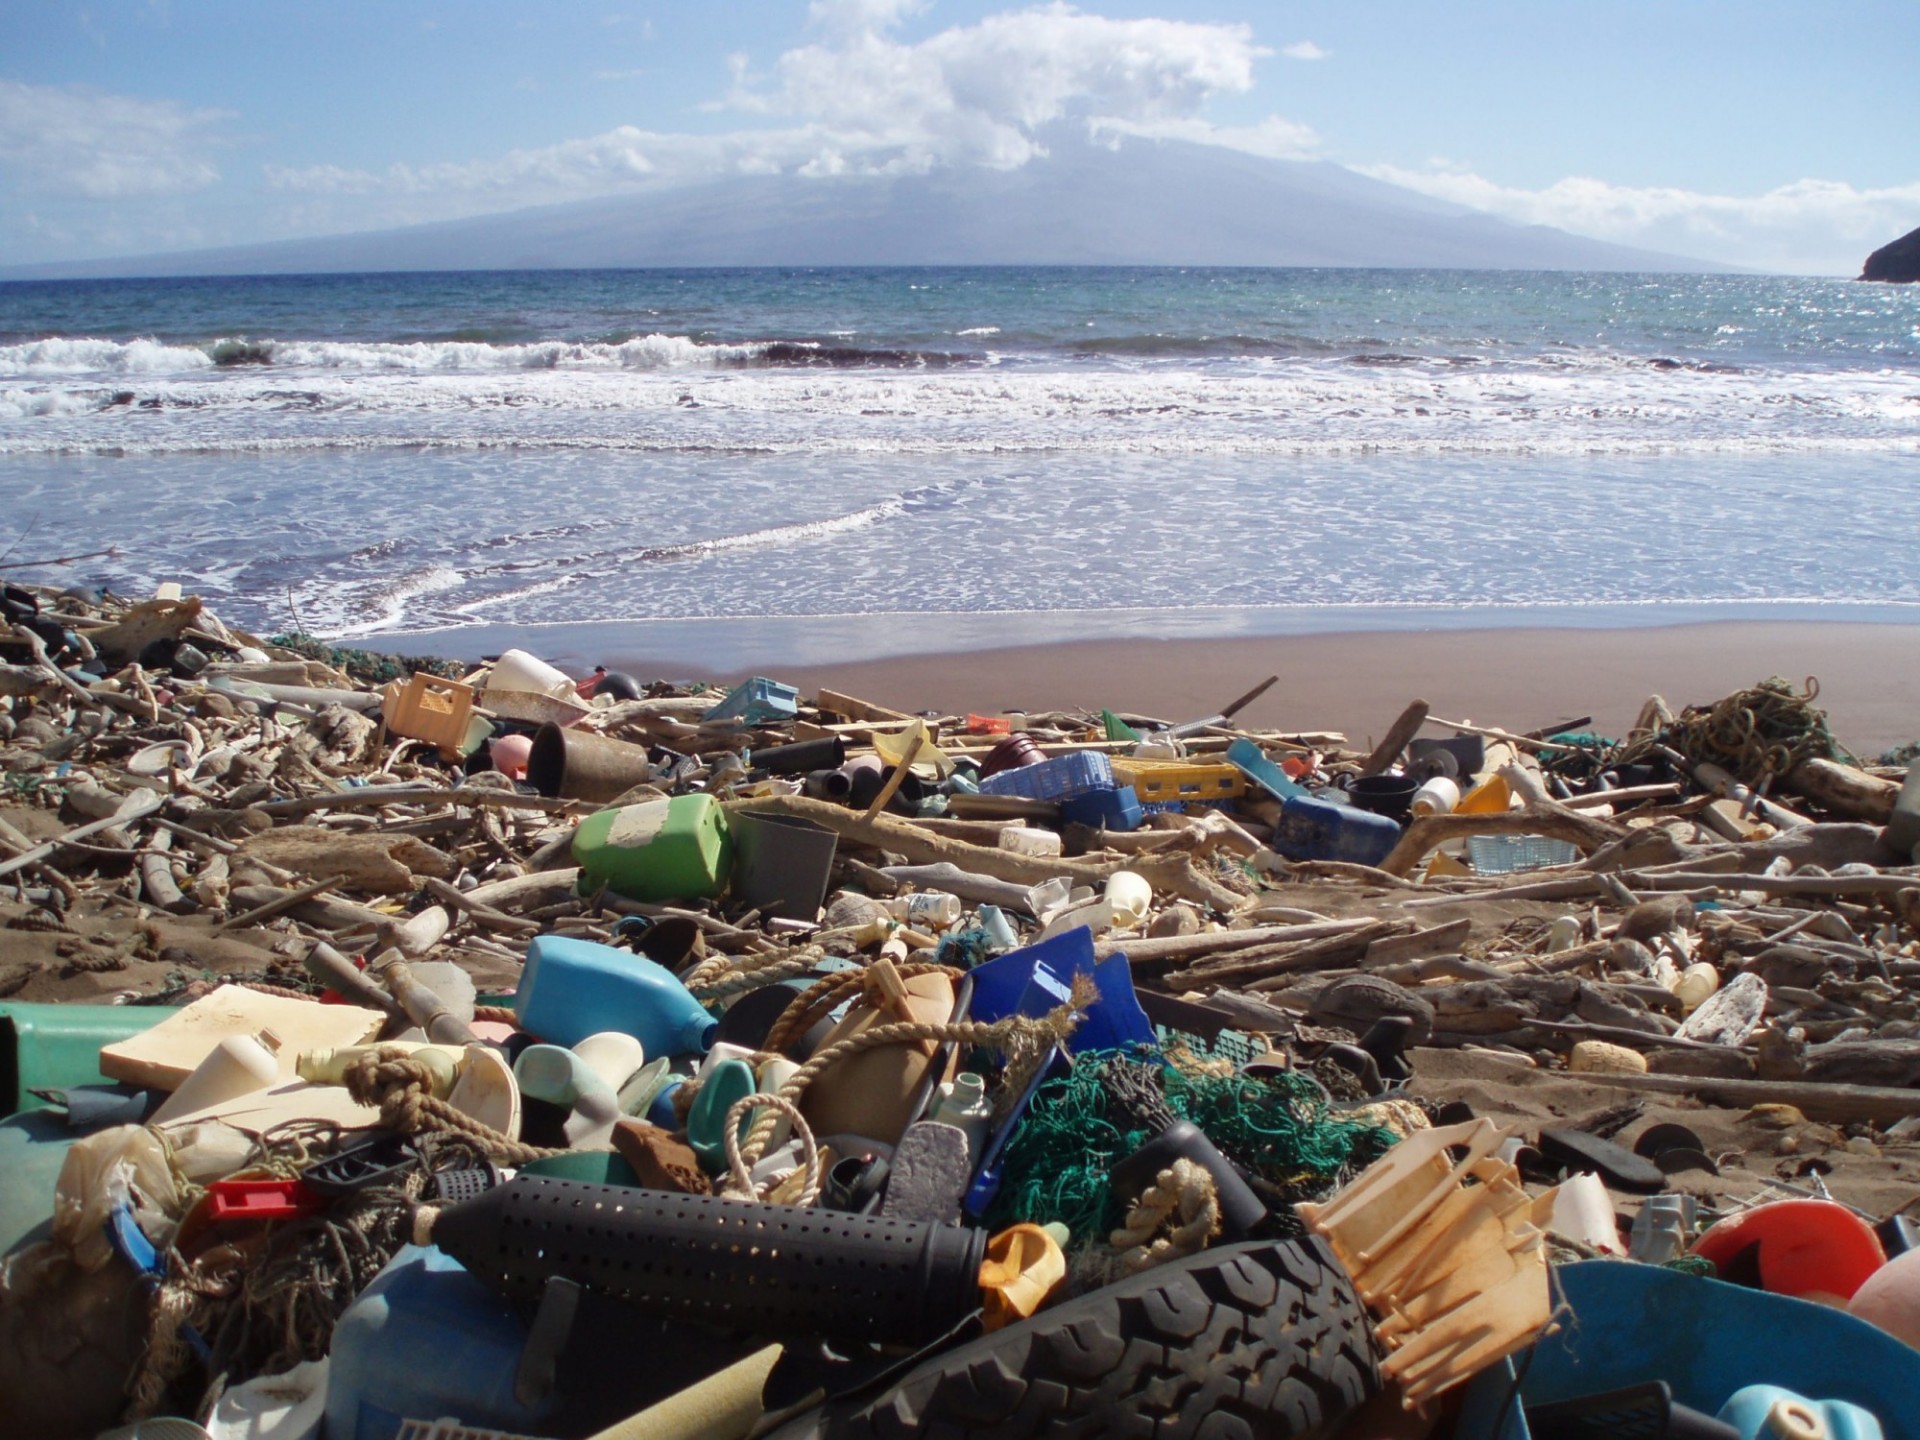 Plastic and other debris washed up on beach. Credit: NOAA's National Ocean Service